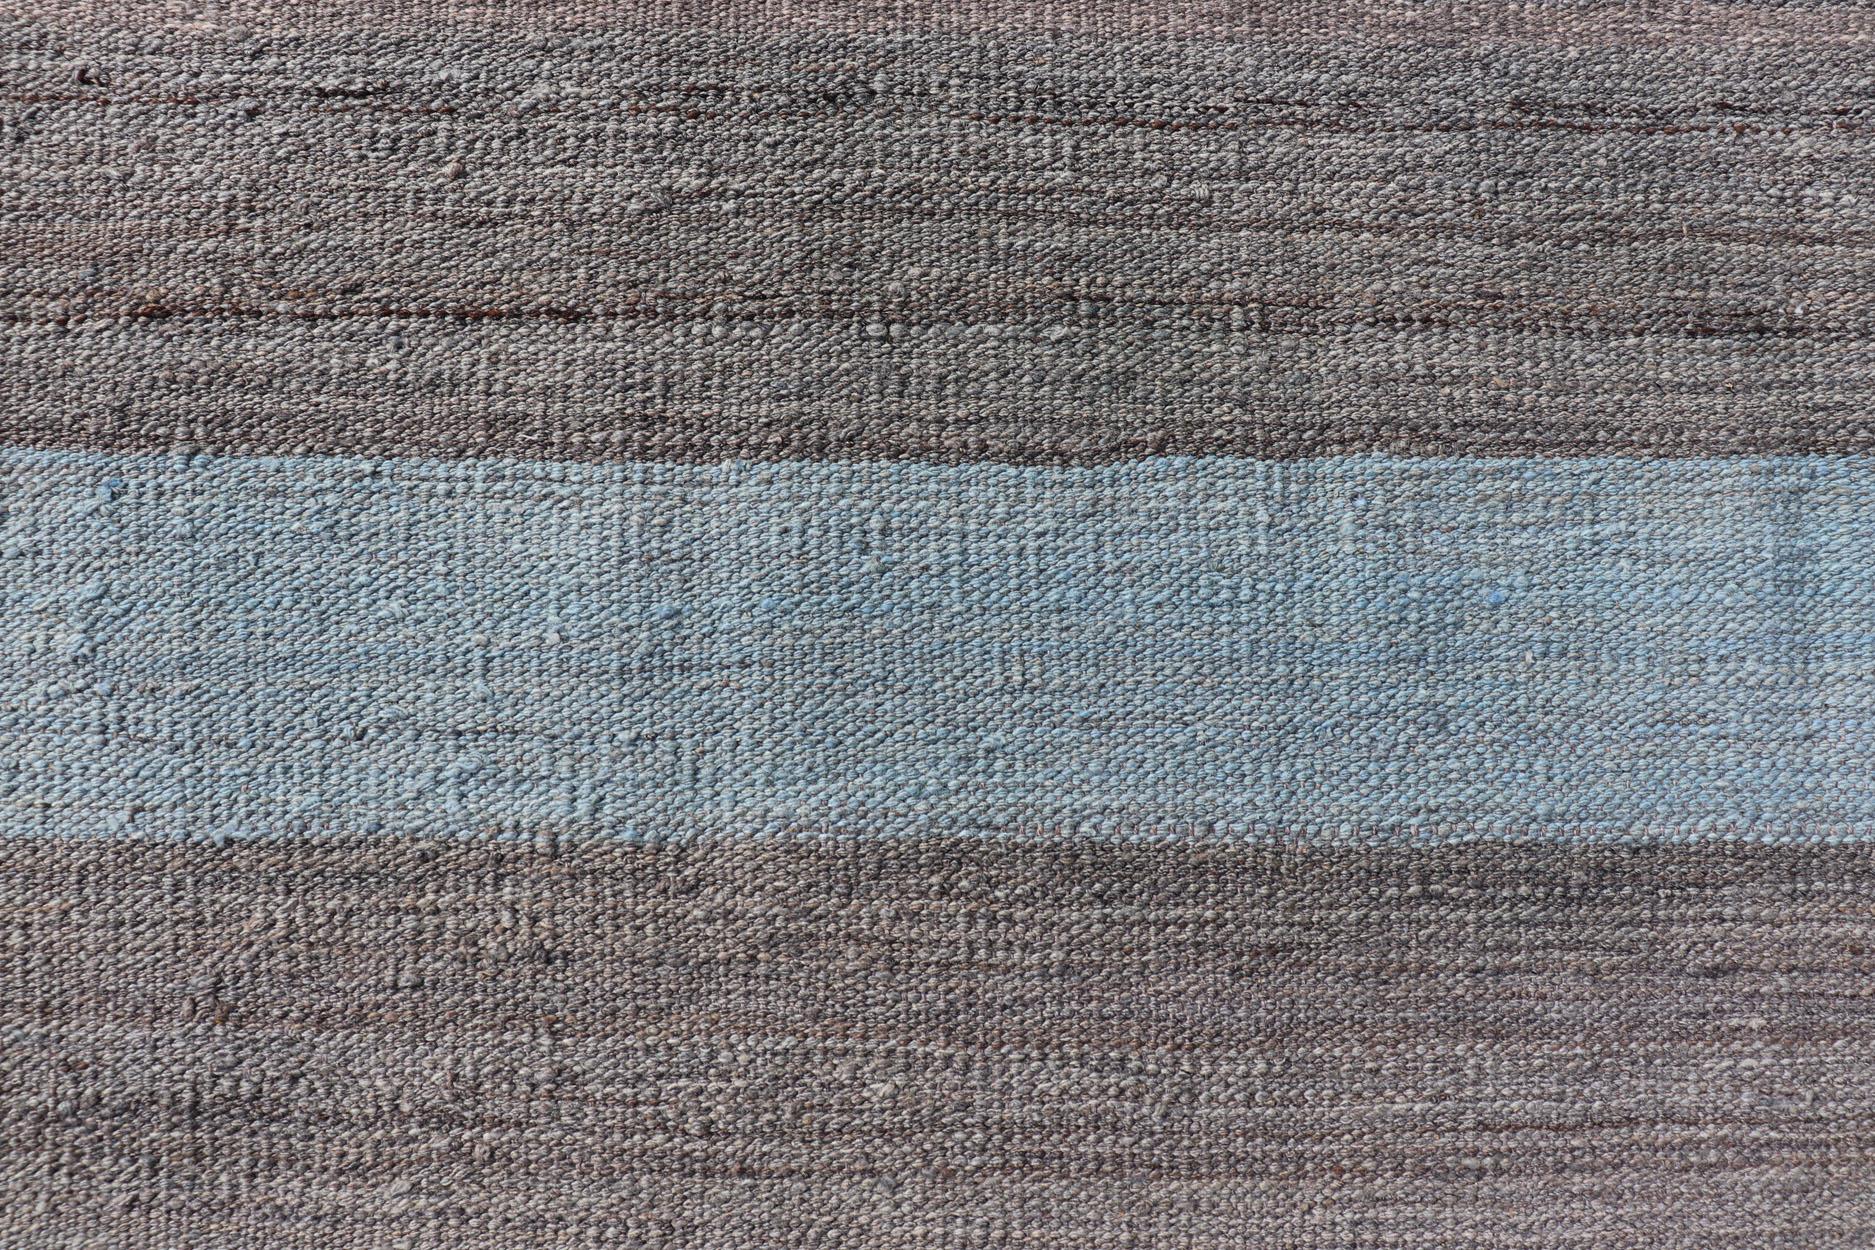 Modern Kilim Casual Rug with Stripes in Shades of Blue, Gray' and Charcoal 1